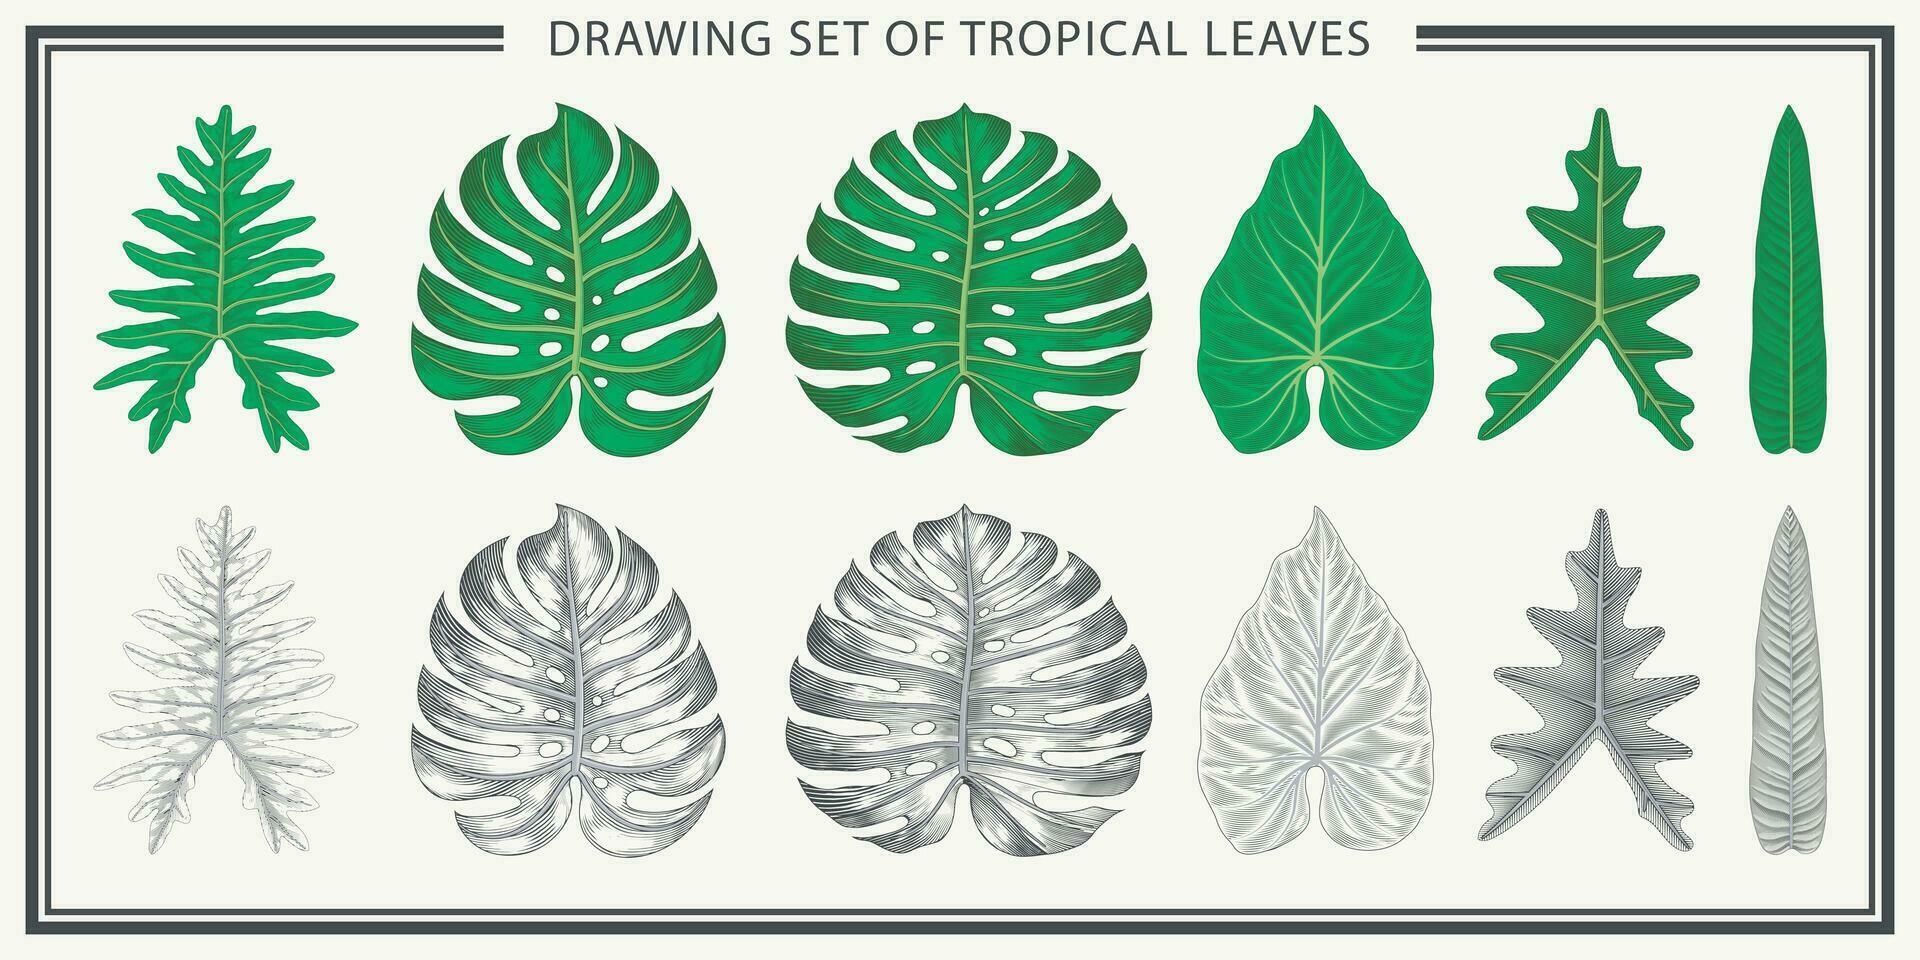 Drawing set of tropical leaves. Isolated elements on white background. Vintage style. Hand drawn graphic design vector